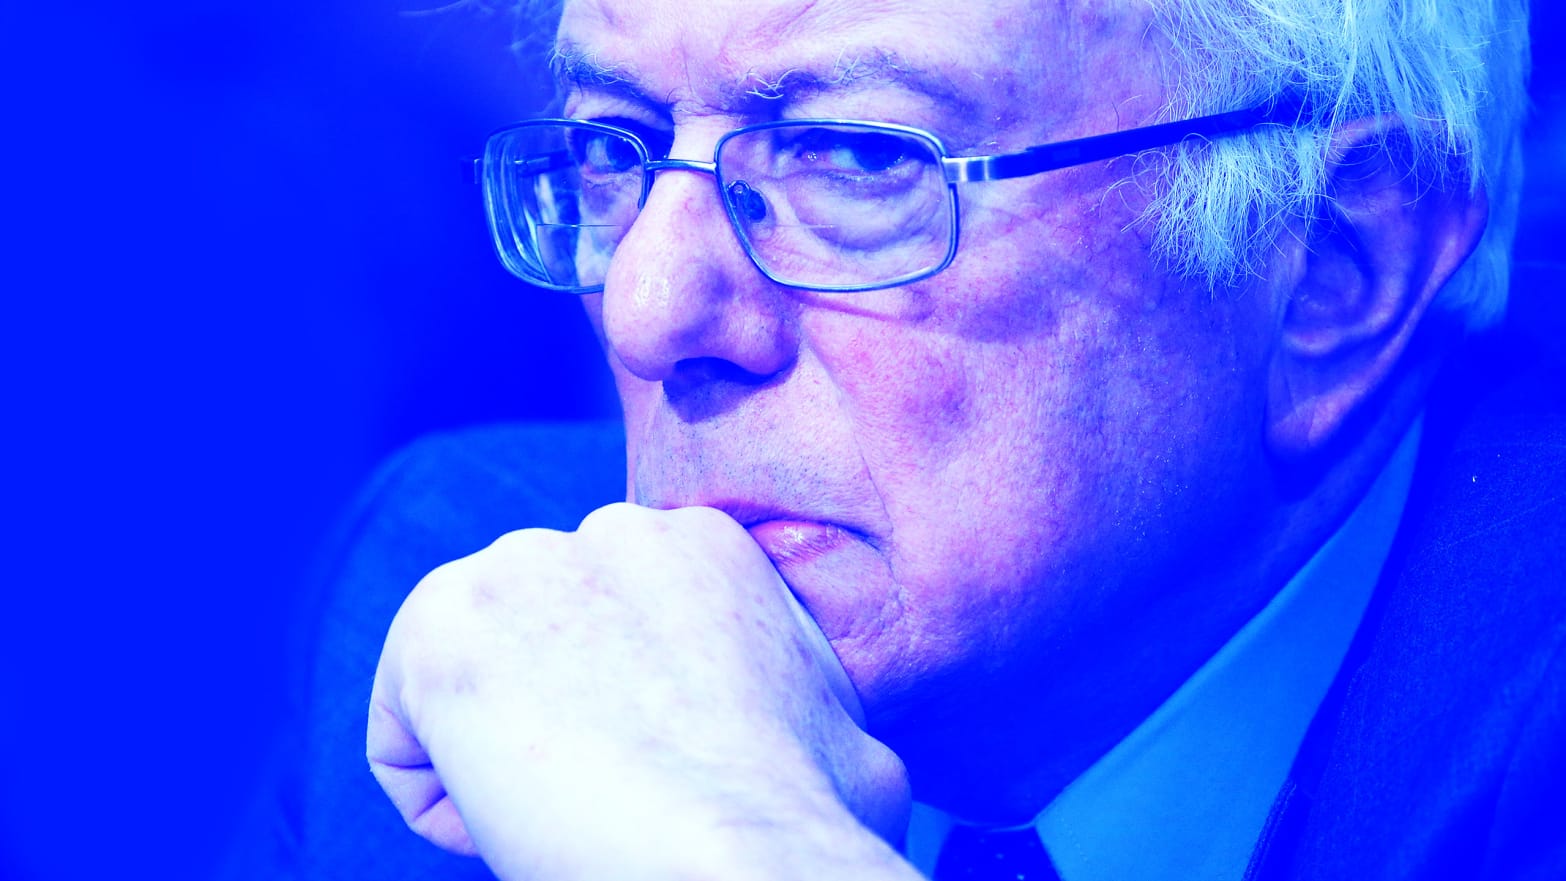 Bernie Sanders: The War on Terror ‘Has Been a Disaster for the American People’